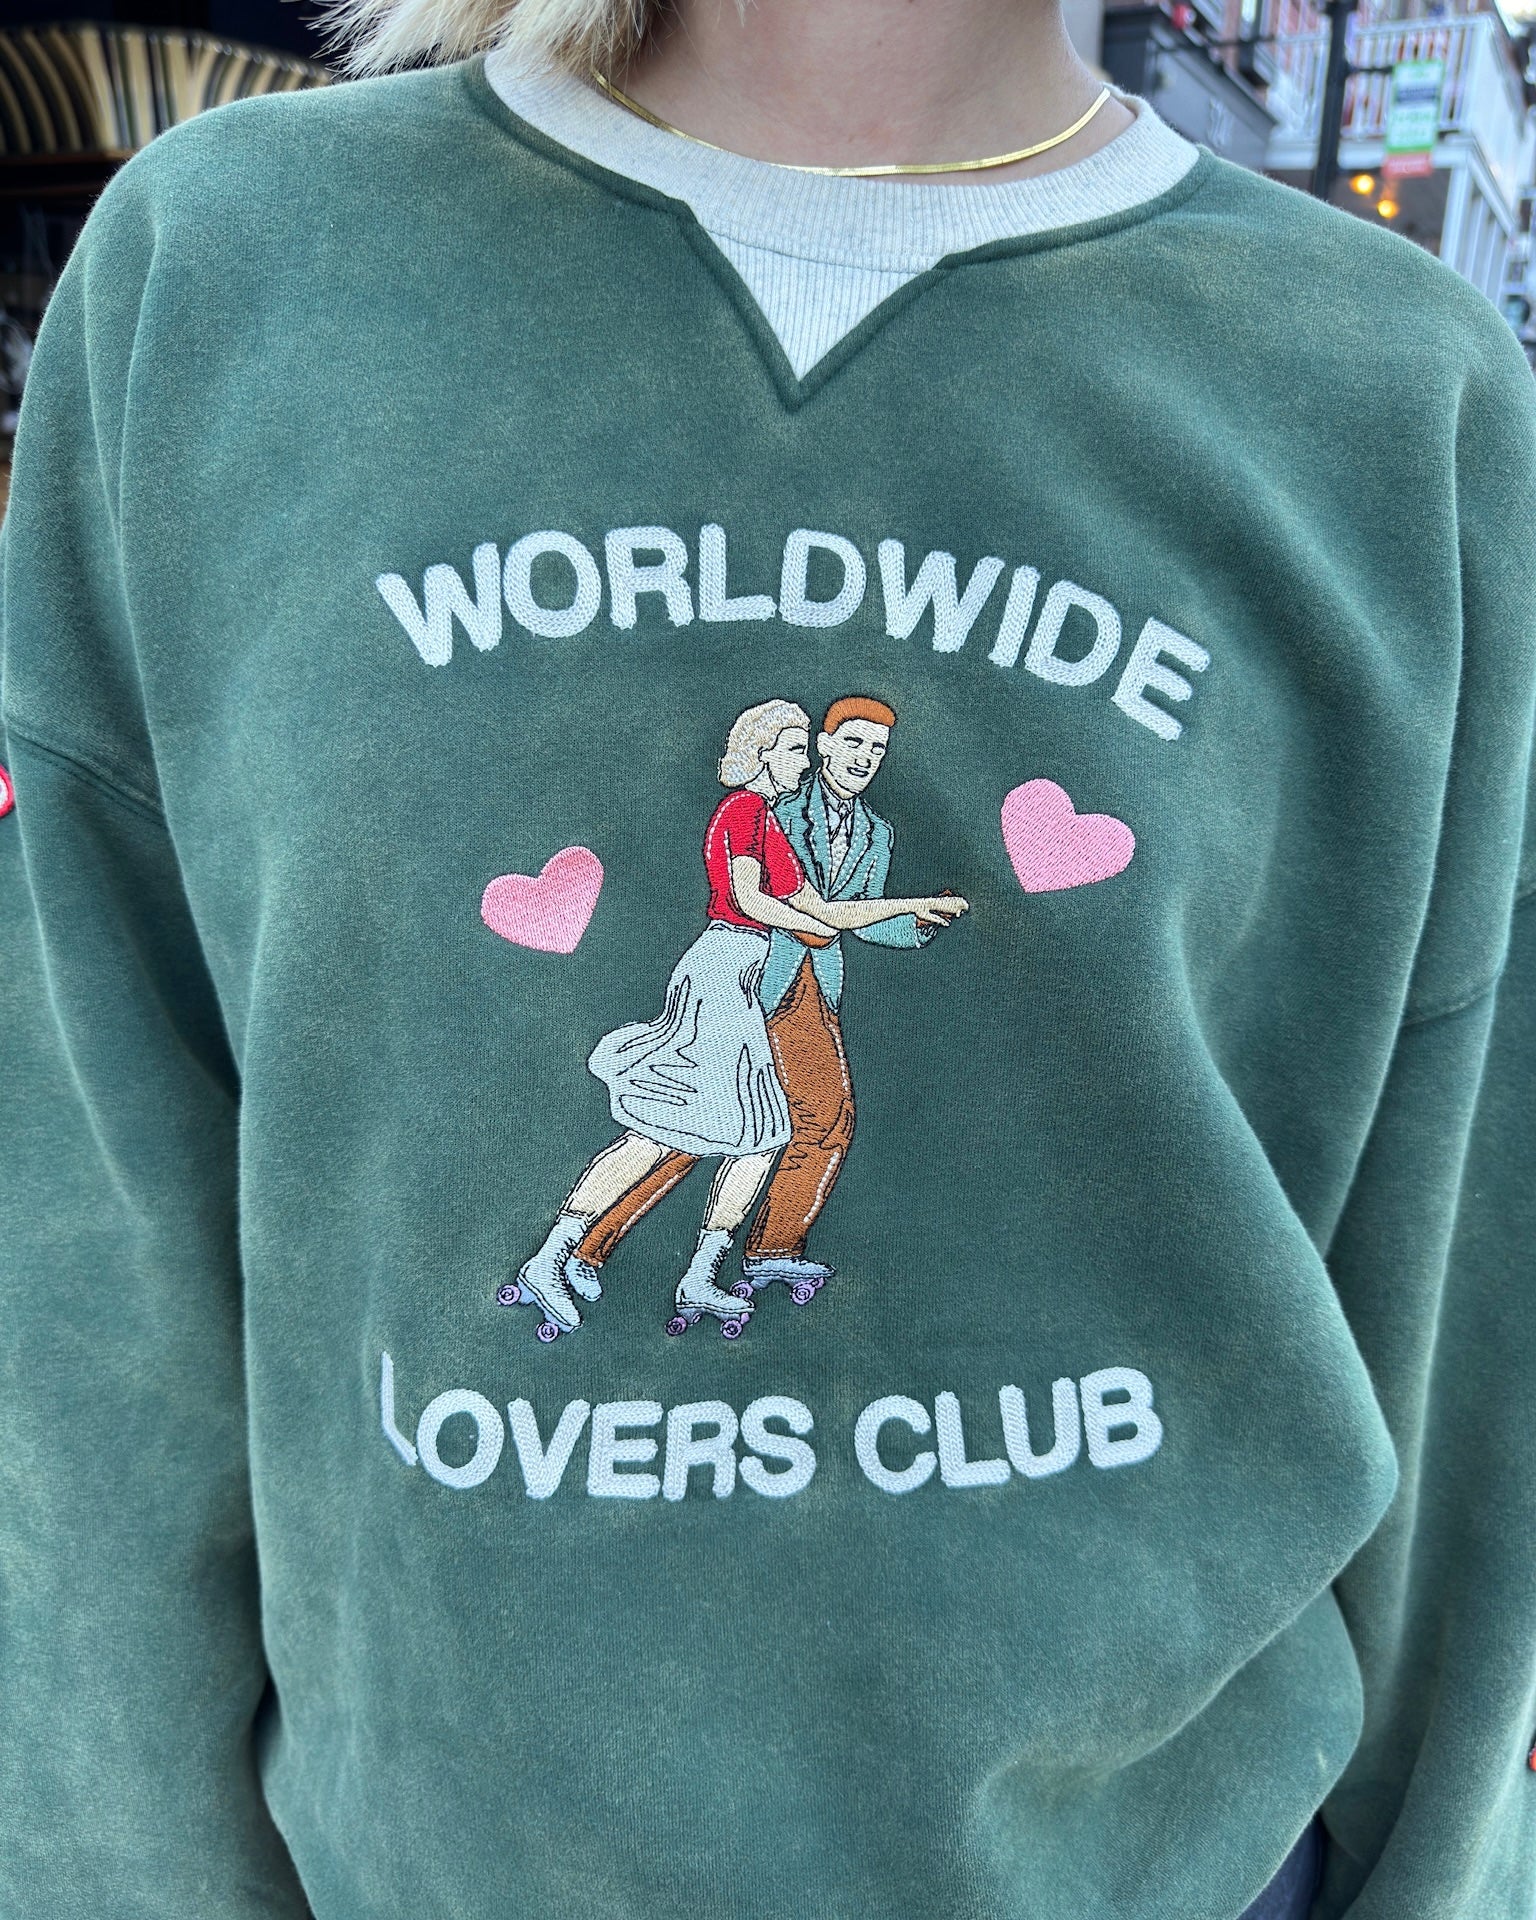 "Lovers Club" Crew Neck in Vintage Washed Green